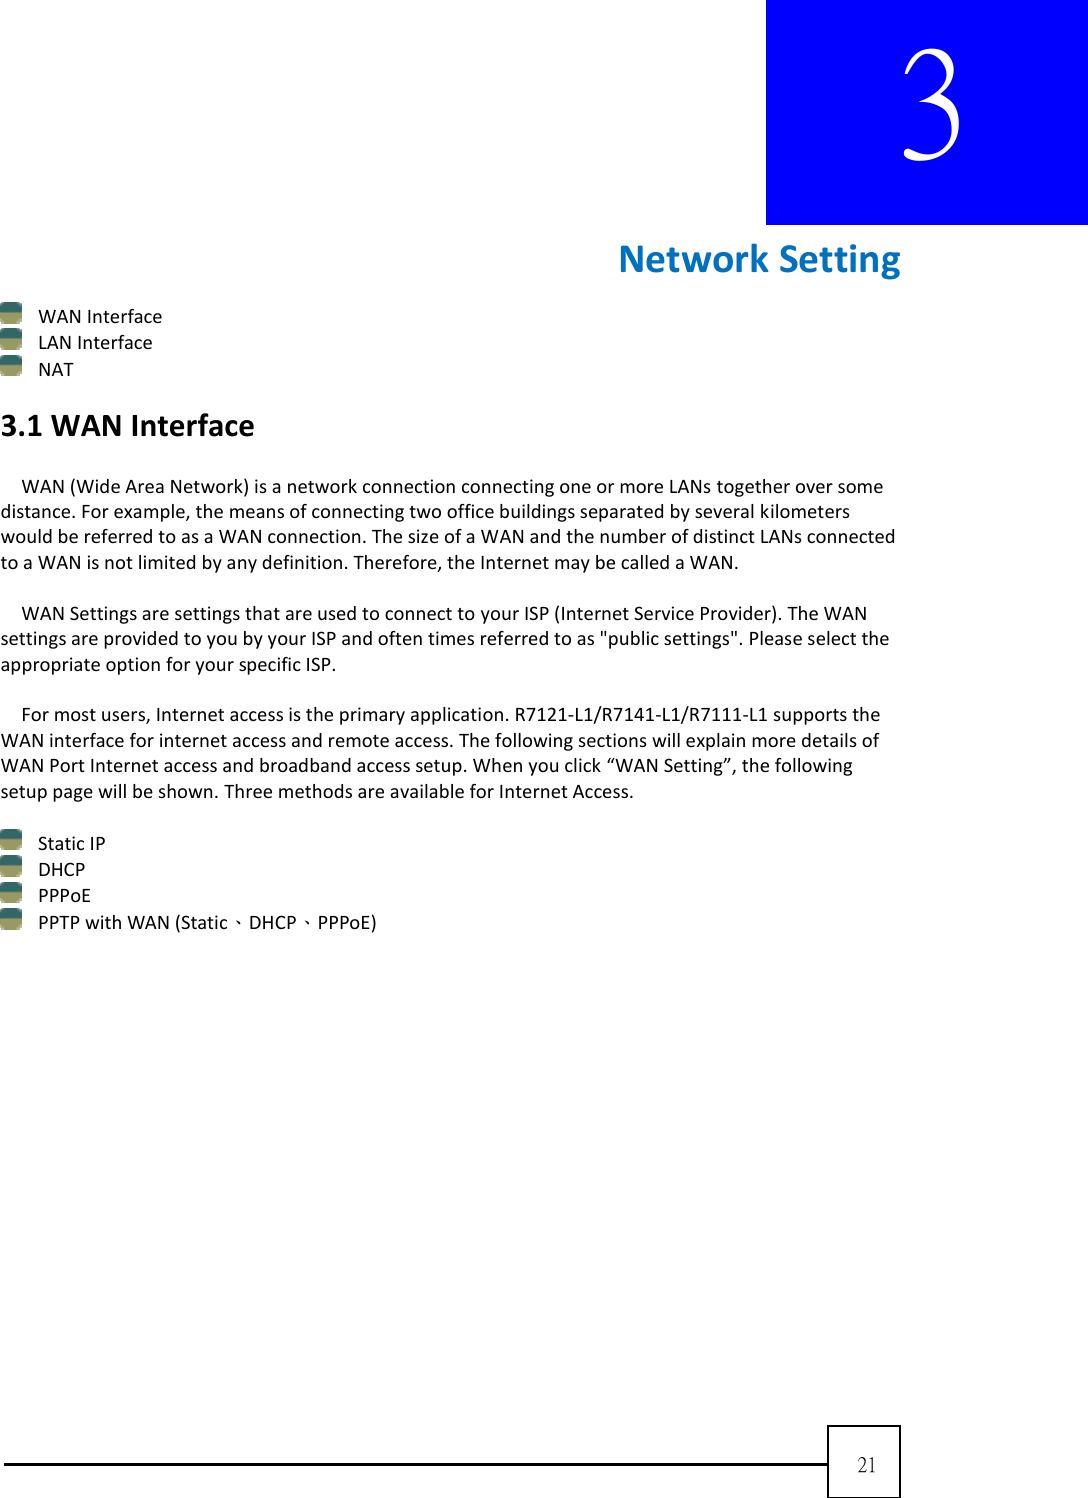  21  3        Network Setting  WAN Interface  LAN Interface    NAT  3.1 WAN Interface  WAN (Wide Area Network) is a network connection connecting one or more LANs together over some distance. For example, the means of connecting two office buildings separated by several kilometers would be referred to as a WAN connection. The size of a WAN and the number of distinct LANs connected to a WAN is not limited by any definition. Therefore, the Internet may be called a WAN.    WAN Settings are settings that are used to connect to your ISP (Internet Service Provider). The WAN settings are provided to you by your ISP and often times referred to as &quot;public settings&quot;. Please select the appropriate option for your specific ISP.      For most users, Internet access is the primary application. R7121-L1/R7141-L1/R7111-L1 supports the WAN interface for internet access and remote access. The following sections will explain more details of WAN Port Internet access and broadband access setup. When you click “WAN Setting”, the following setup page will be shown. Three methods are available for Internet Access.     Static IP    DHCP    PPPoE    PPTP with WAN (Static、DHCP、PPPoE) 